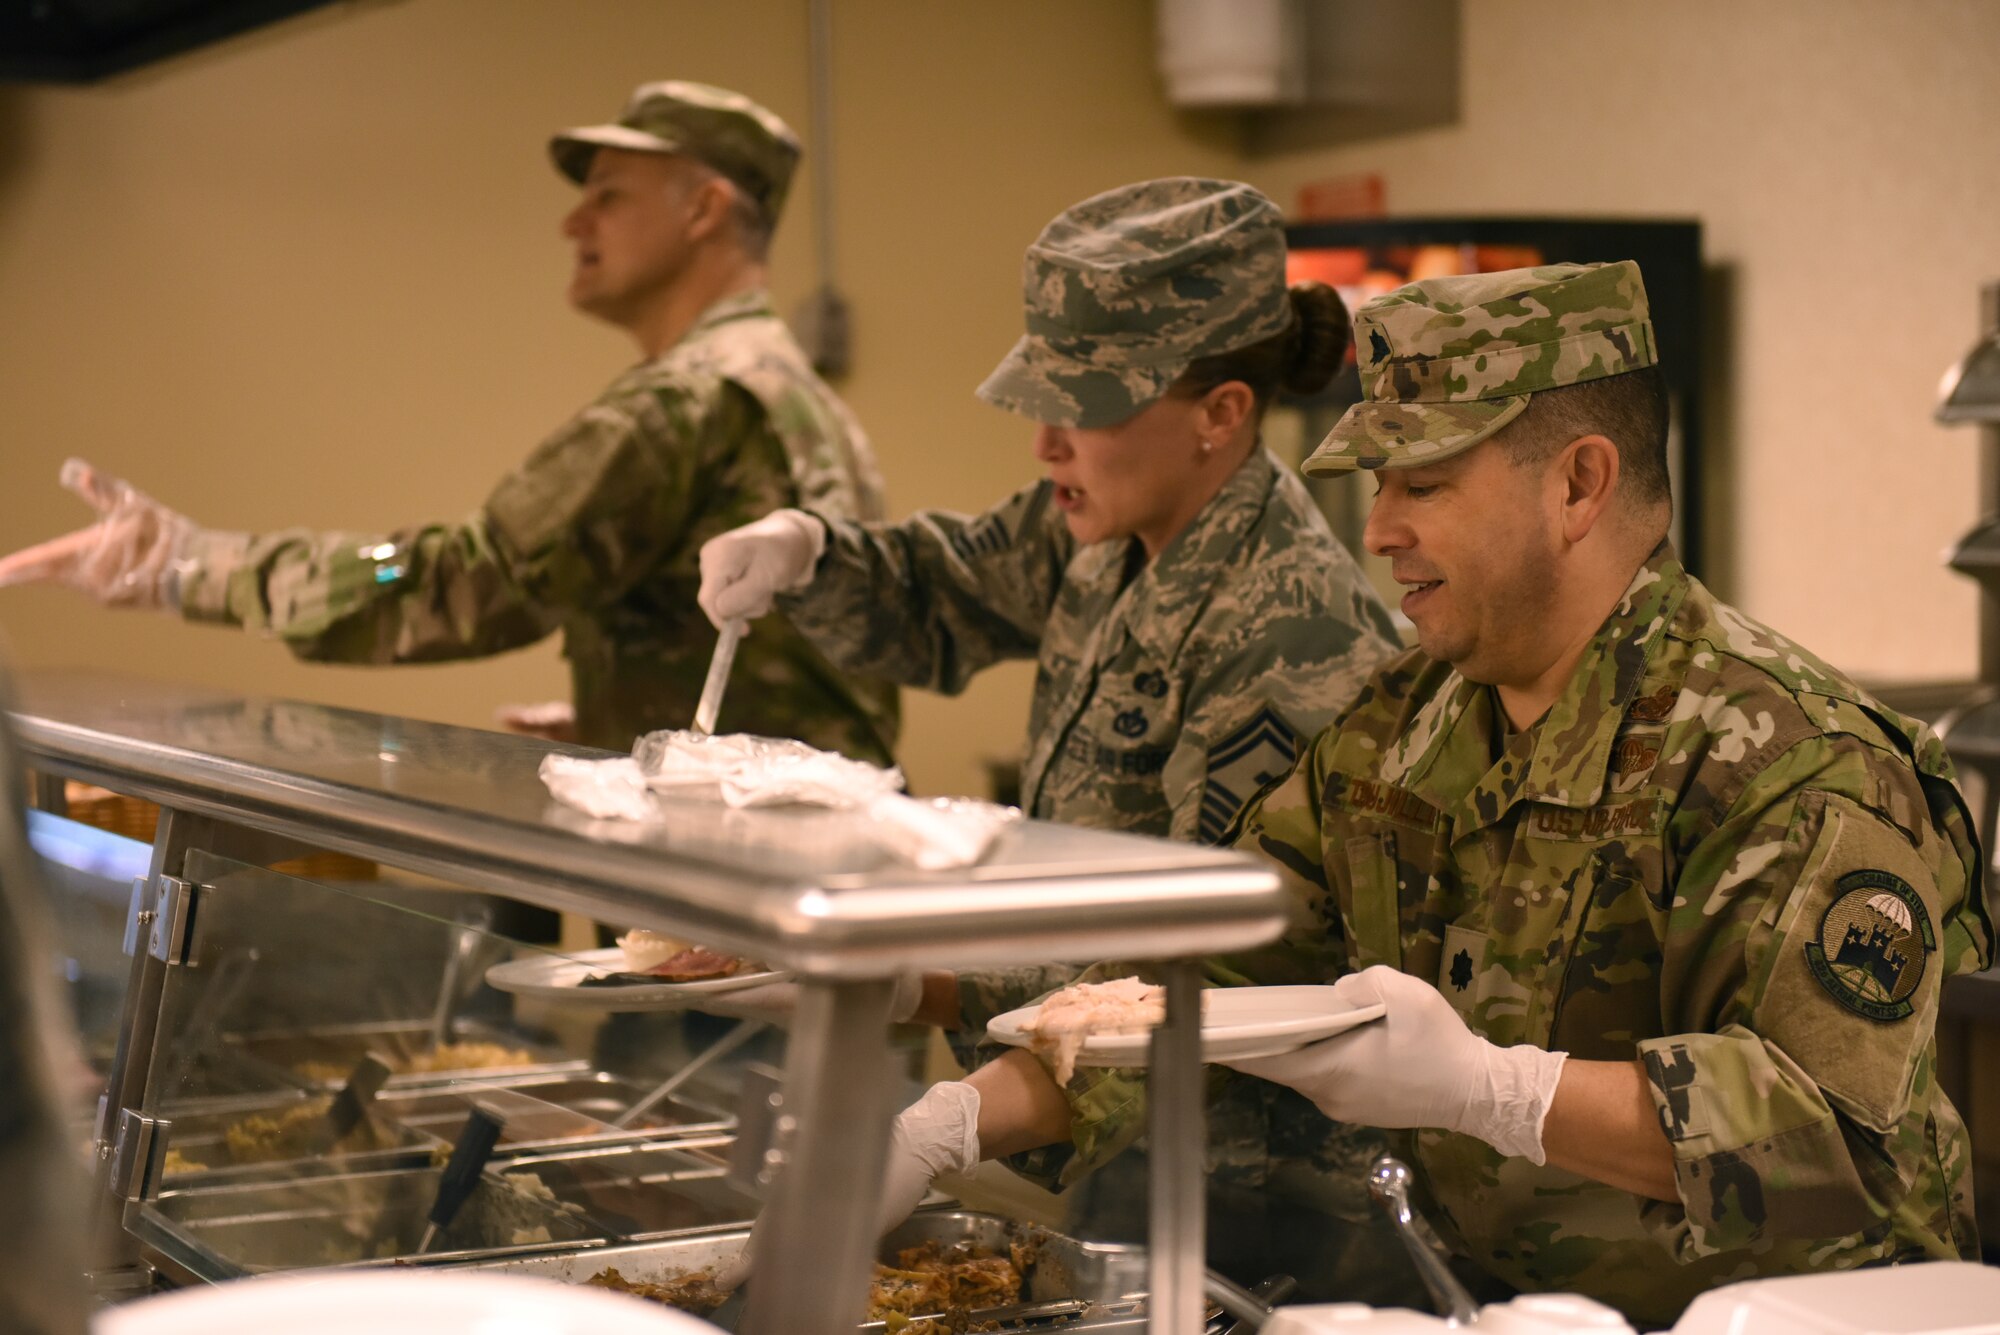 Col. Jay D. Miller, vice commander of the 911th Airlift Wing, Senior Master Sgt. Jessica E. Davis, first sergeant of the 32nd Aerial Port, and Lt. Col. Reginald G. Trujillo, commander of the 32nd Aerial Port Squadron, serve a Thanksgiving lunch to Airmen at the Pittsburgh International Airport Air Reserve Station, Pennsylvania, Nov. 3, 2018. Base leadership used this time to promote teamwork and camaraderie among the entire base. (U.S. Air Force photo by Senior Airman Grace Thomson)